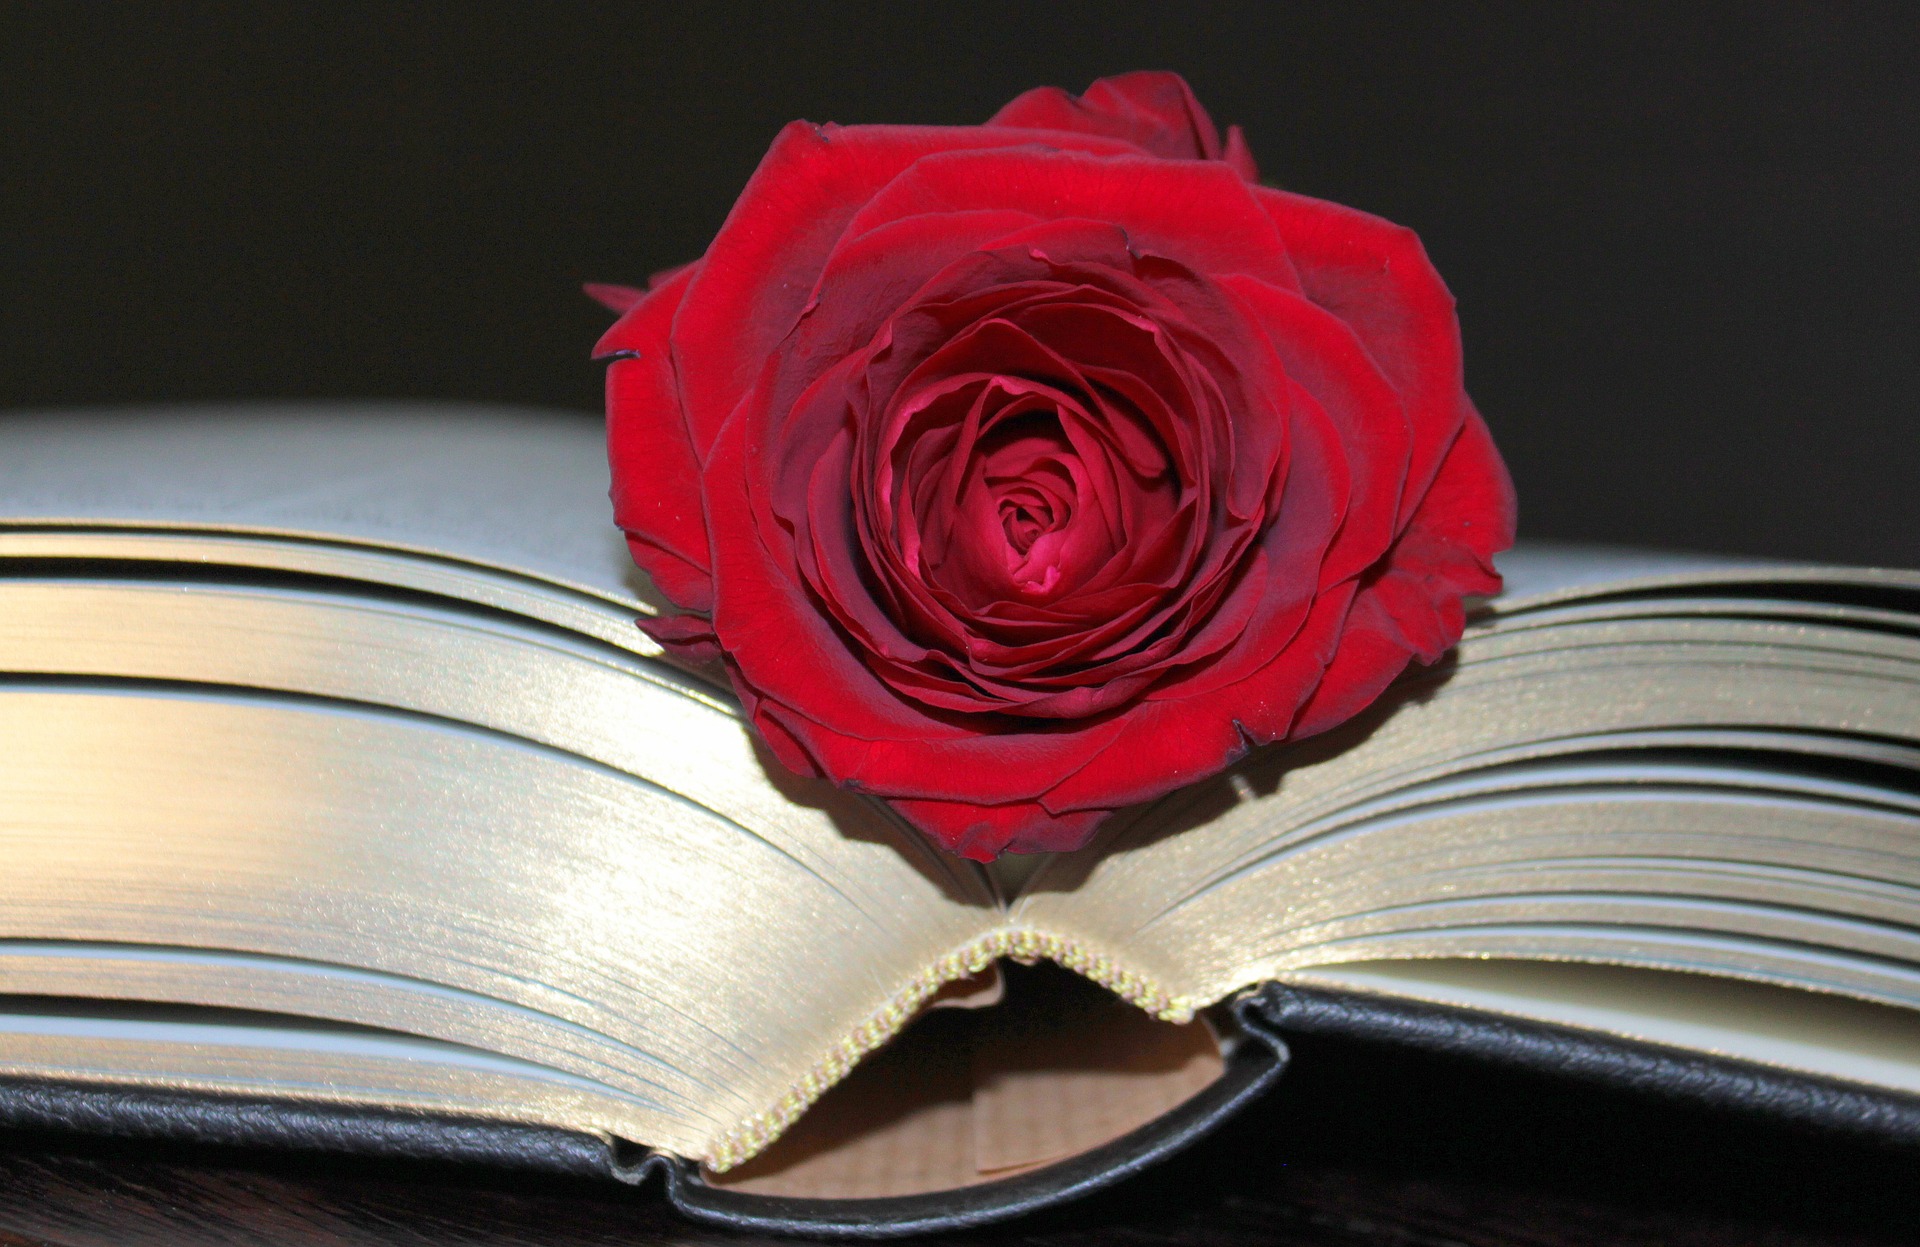 Rose in the book photo